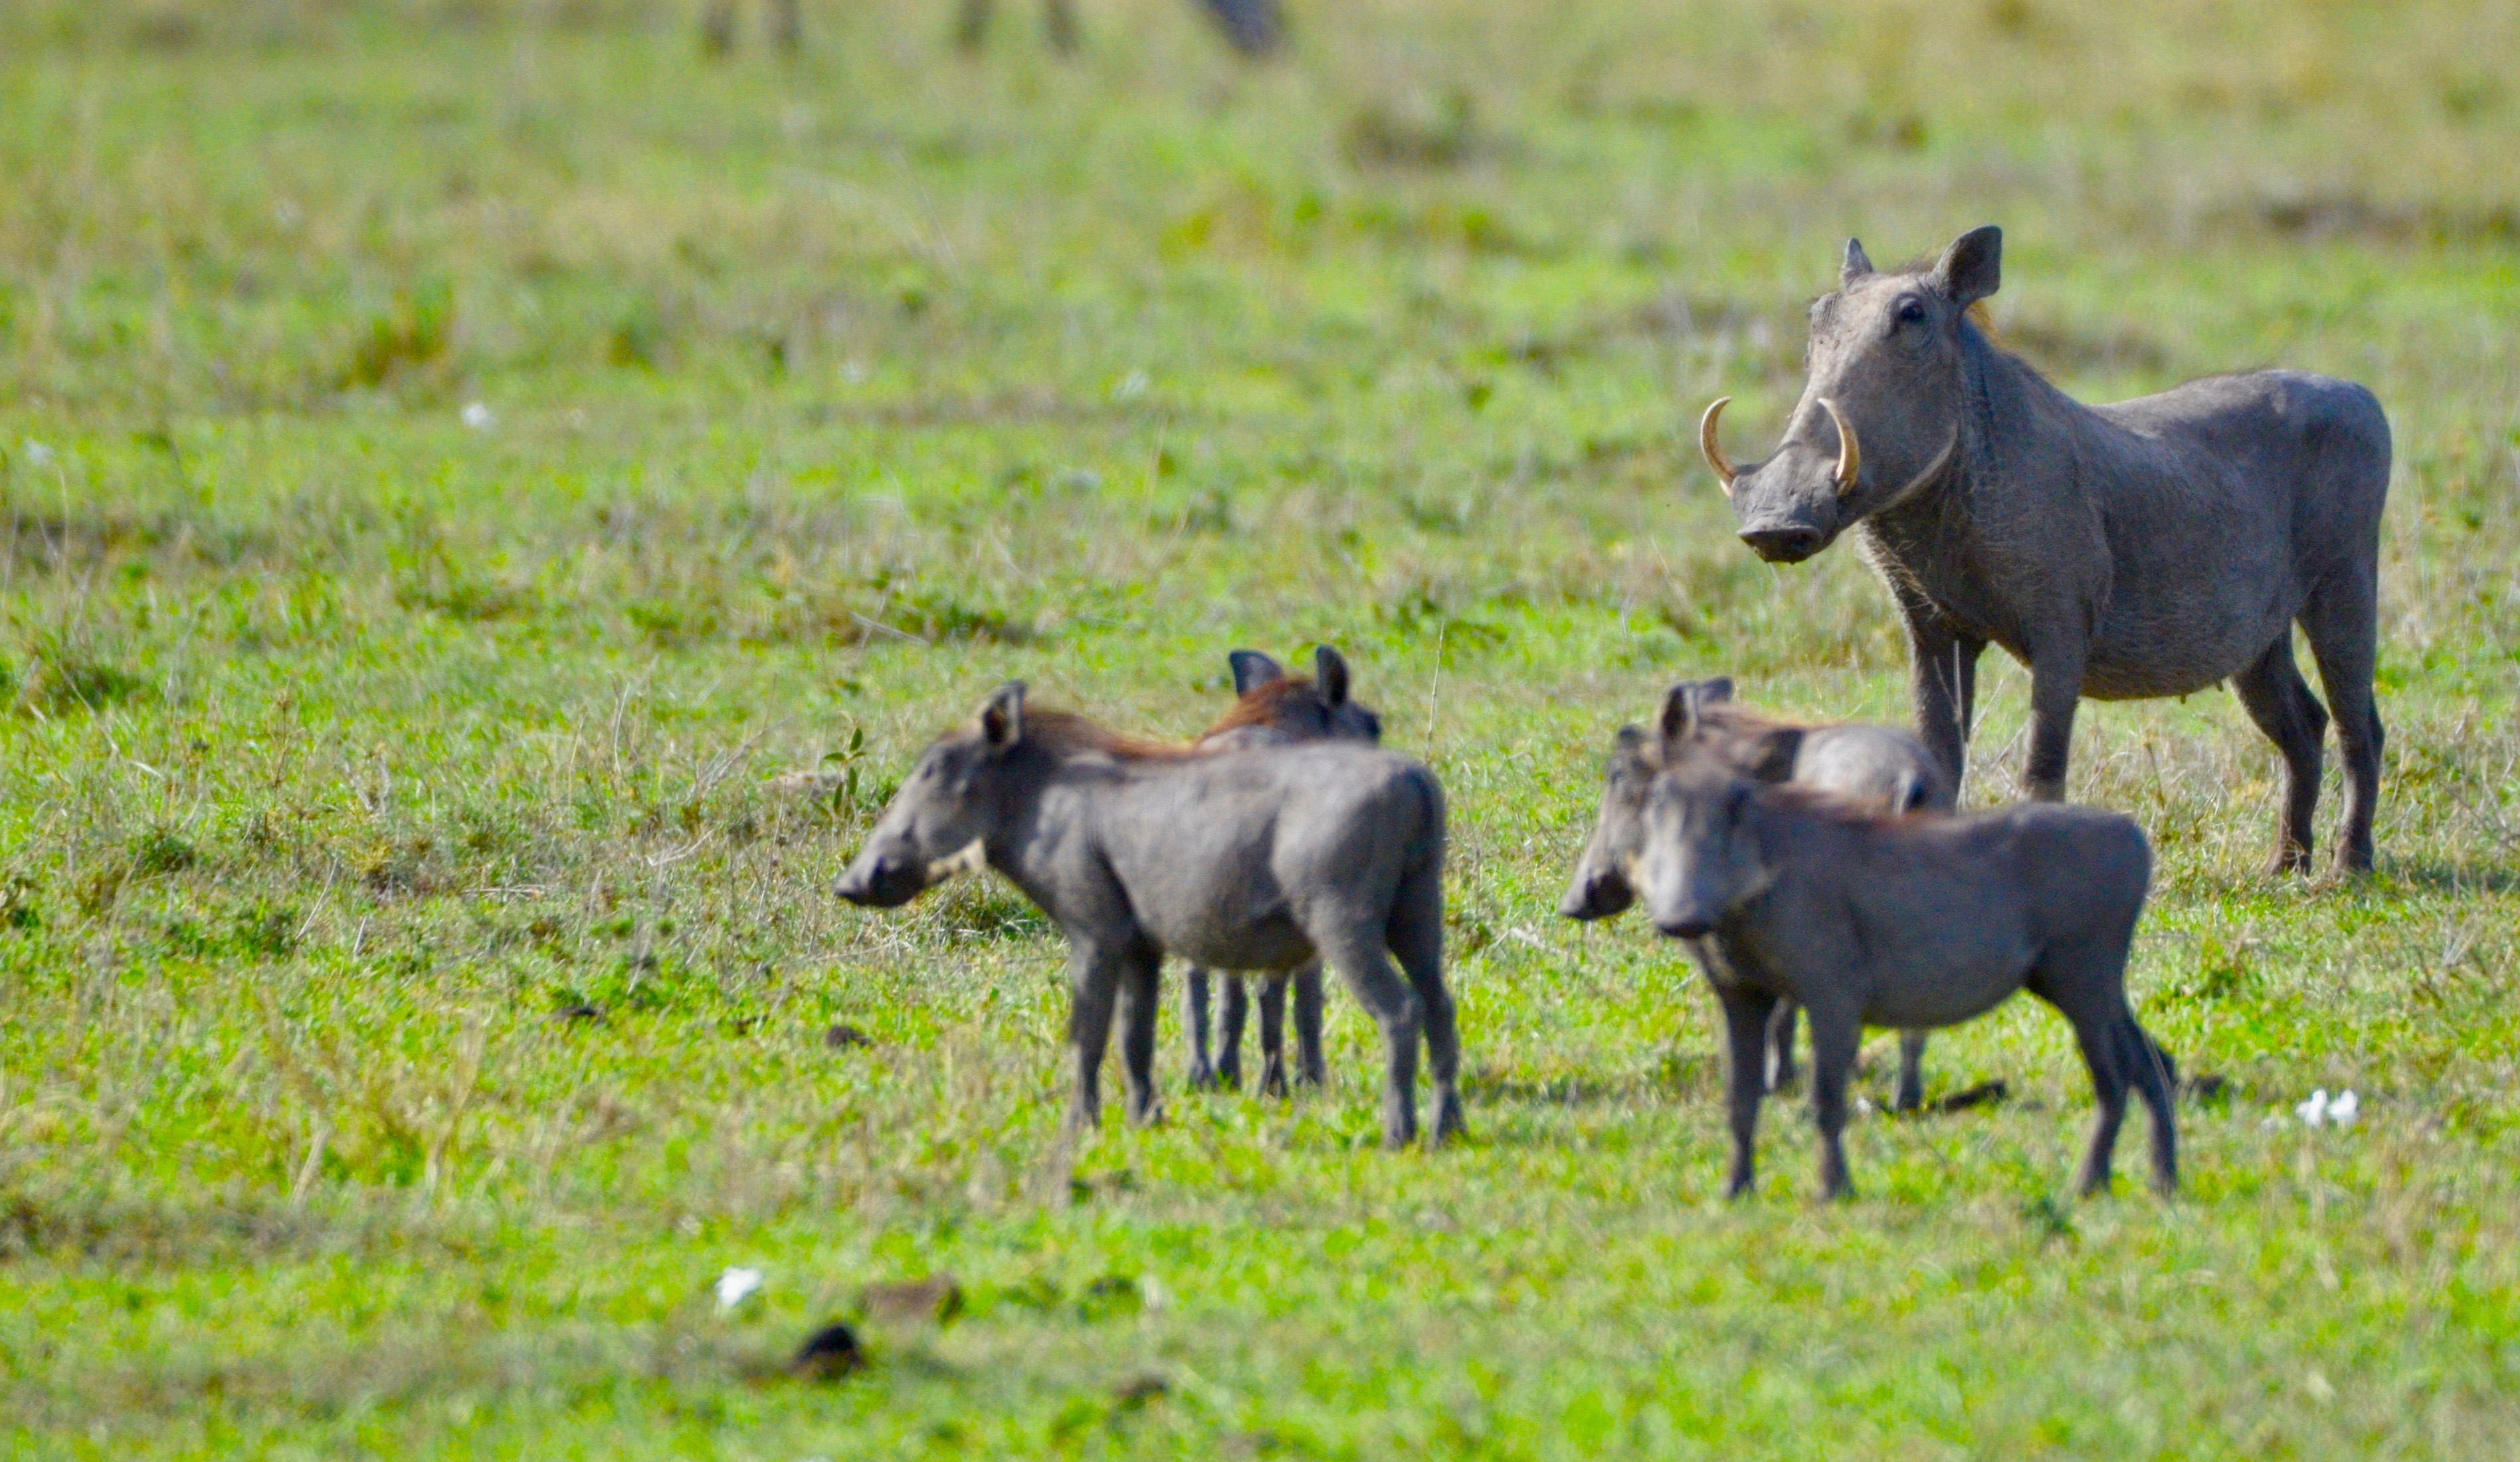 The Warthogs